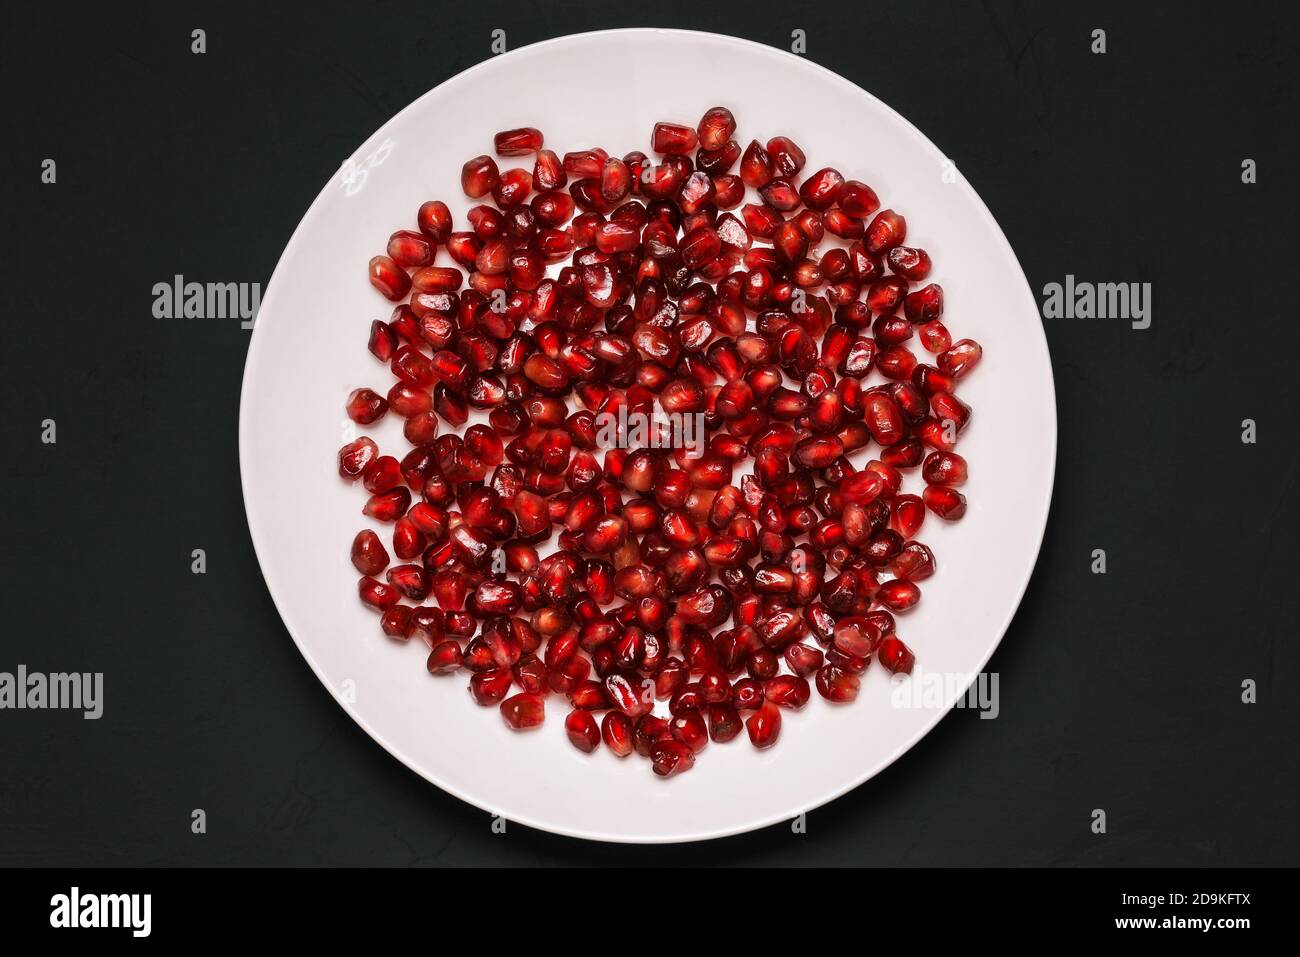 Pomegranate seeds on a plate isolated on a black background. Peeled fresh pomegranate. Healthy healthy food with vitamins Stock Photo